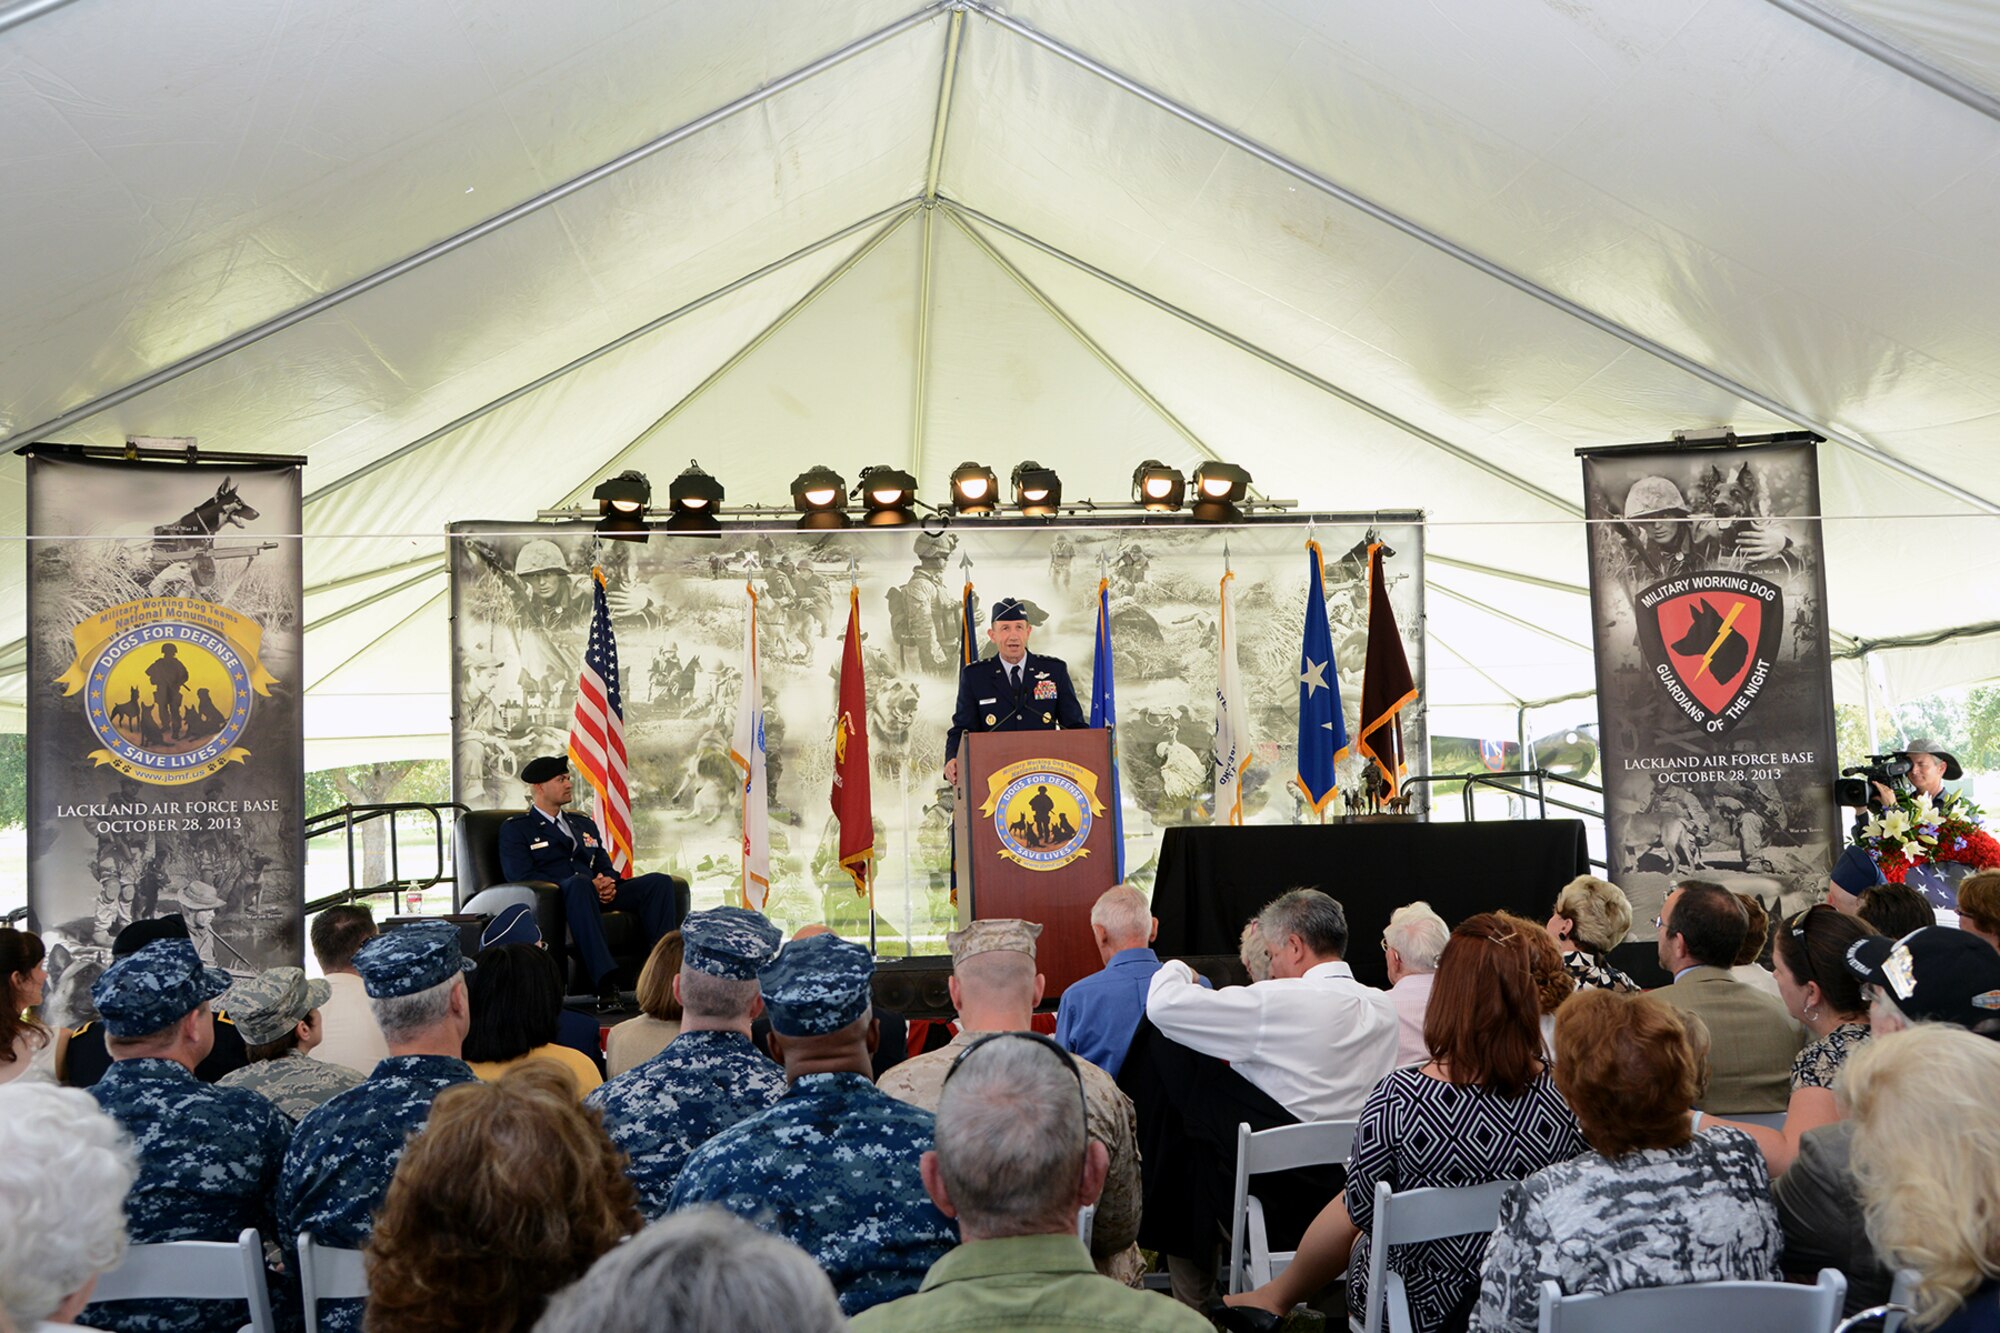 JOINT BASE SAN ANTONIO-LACKLAND, Texas --Lt. Gen. James Holmes Vice Commander, Air Education and Training Command, Joint Base San Antonio-Randolph, speaks at the U.S. Military Working Dog Teams National Monument dedication ceremony Oct. 28 at Joint Base San Antonio-Lackland. JBSA-Lackland is the home to the Department of Defense Military Working Dog Program and is where the U.S. Armed Forces has been training its military working dog teams since 1958. It is the world's largest training center for military dogs and handlers and is also home to the largest veterinary hospital for military working dogs.(U.S. Air Force photo by Ben Faske)
